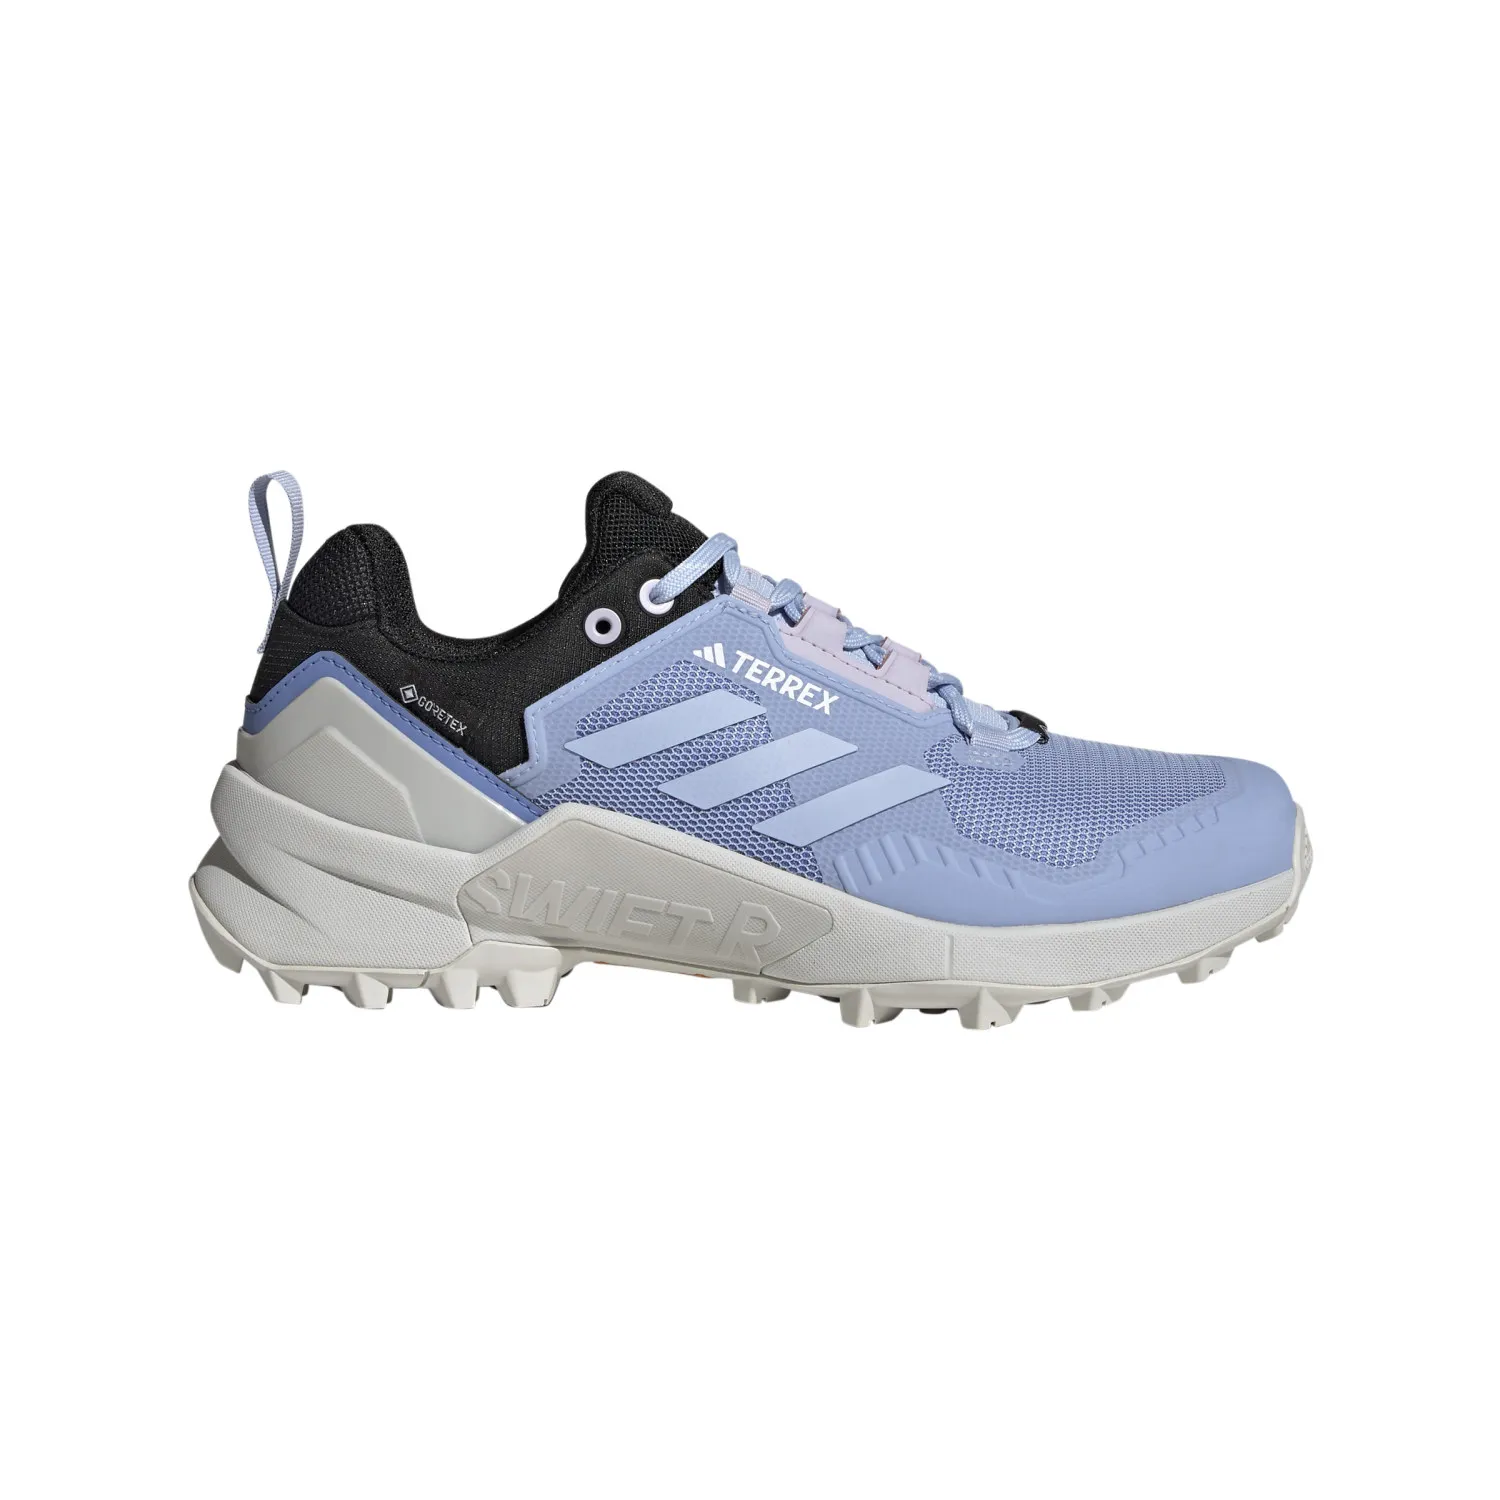 102_HP8715_1_FOOTWEAR_Photography_Side Lateral Center View_transparent.jpg